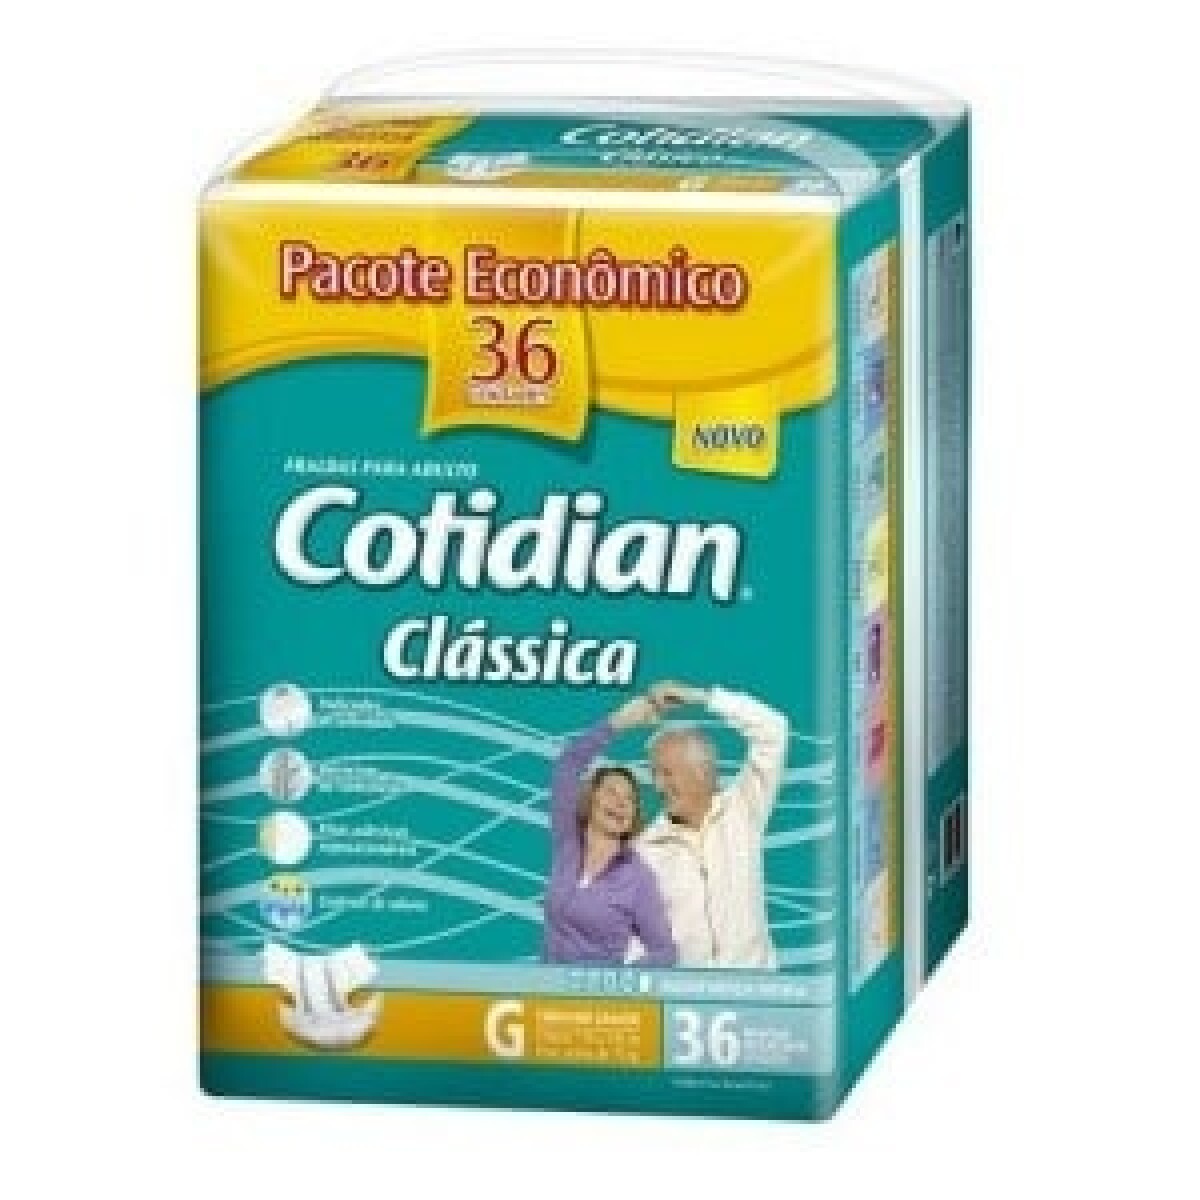 Cotidian Clasico G 